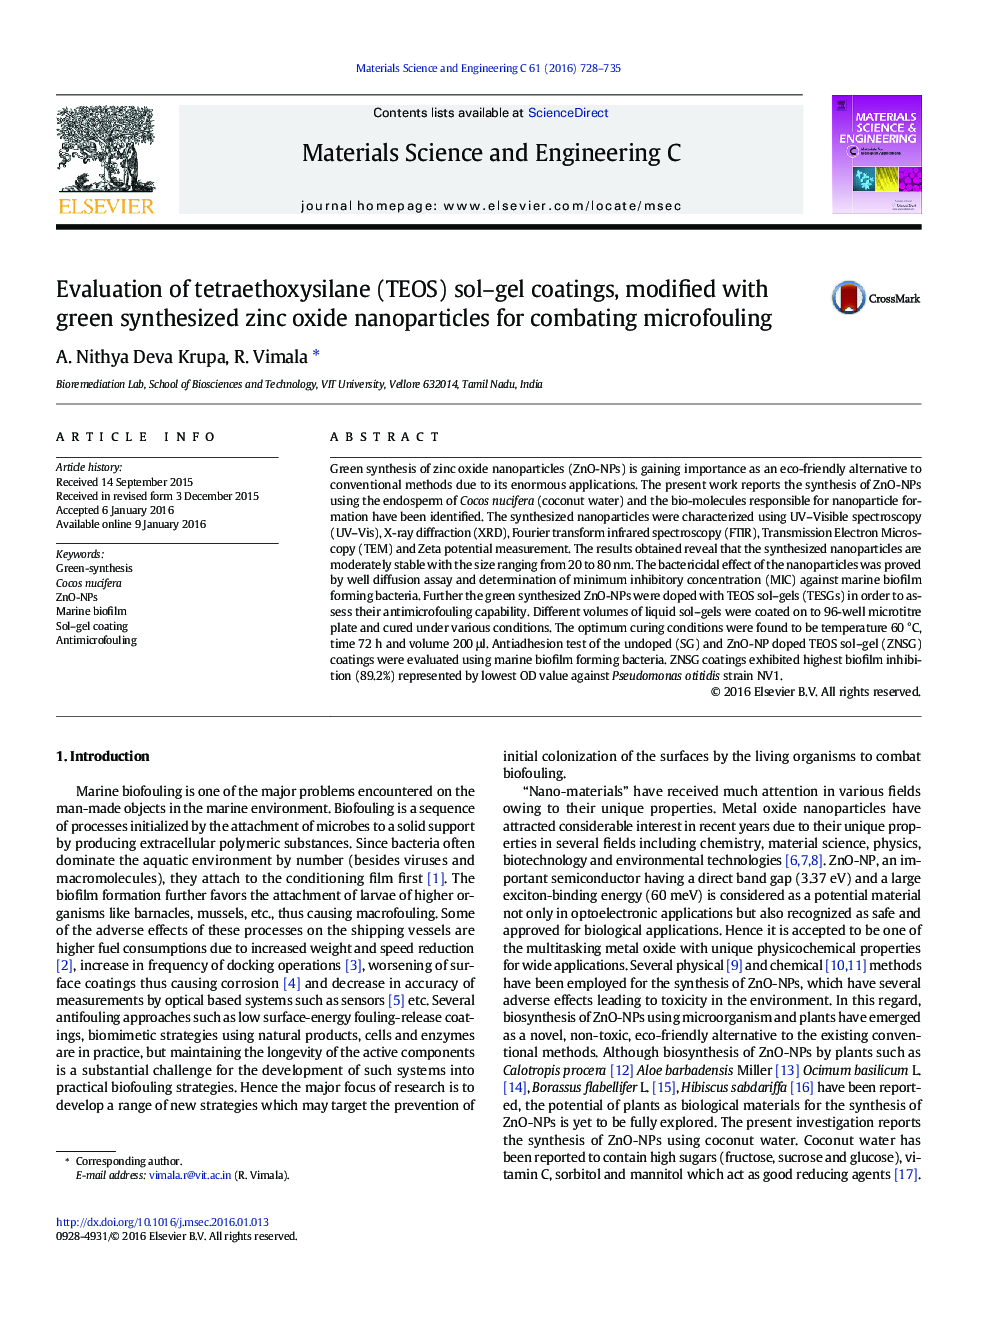 Evaluation of tetraethoxysilane (TEOS) sol-gel coatings, modified with green synthesized zinc oxide nanoparticles for combating microfouling